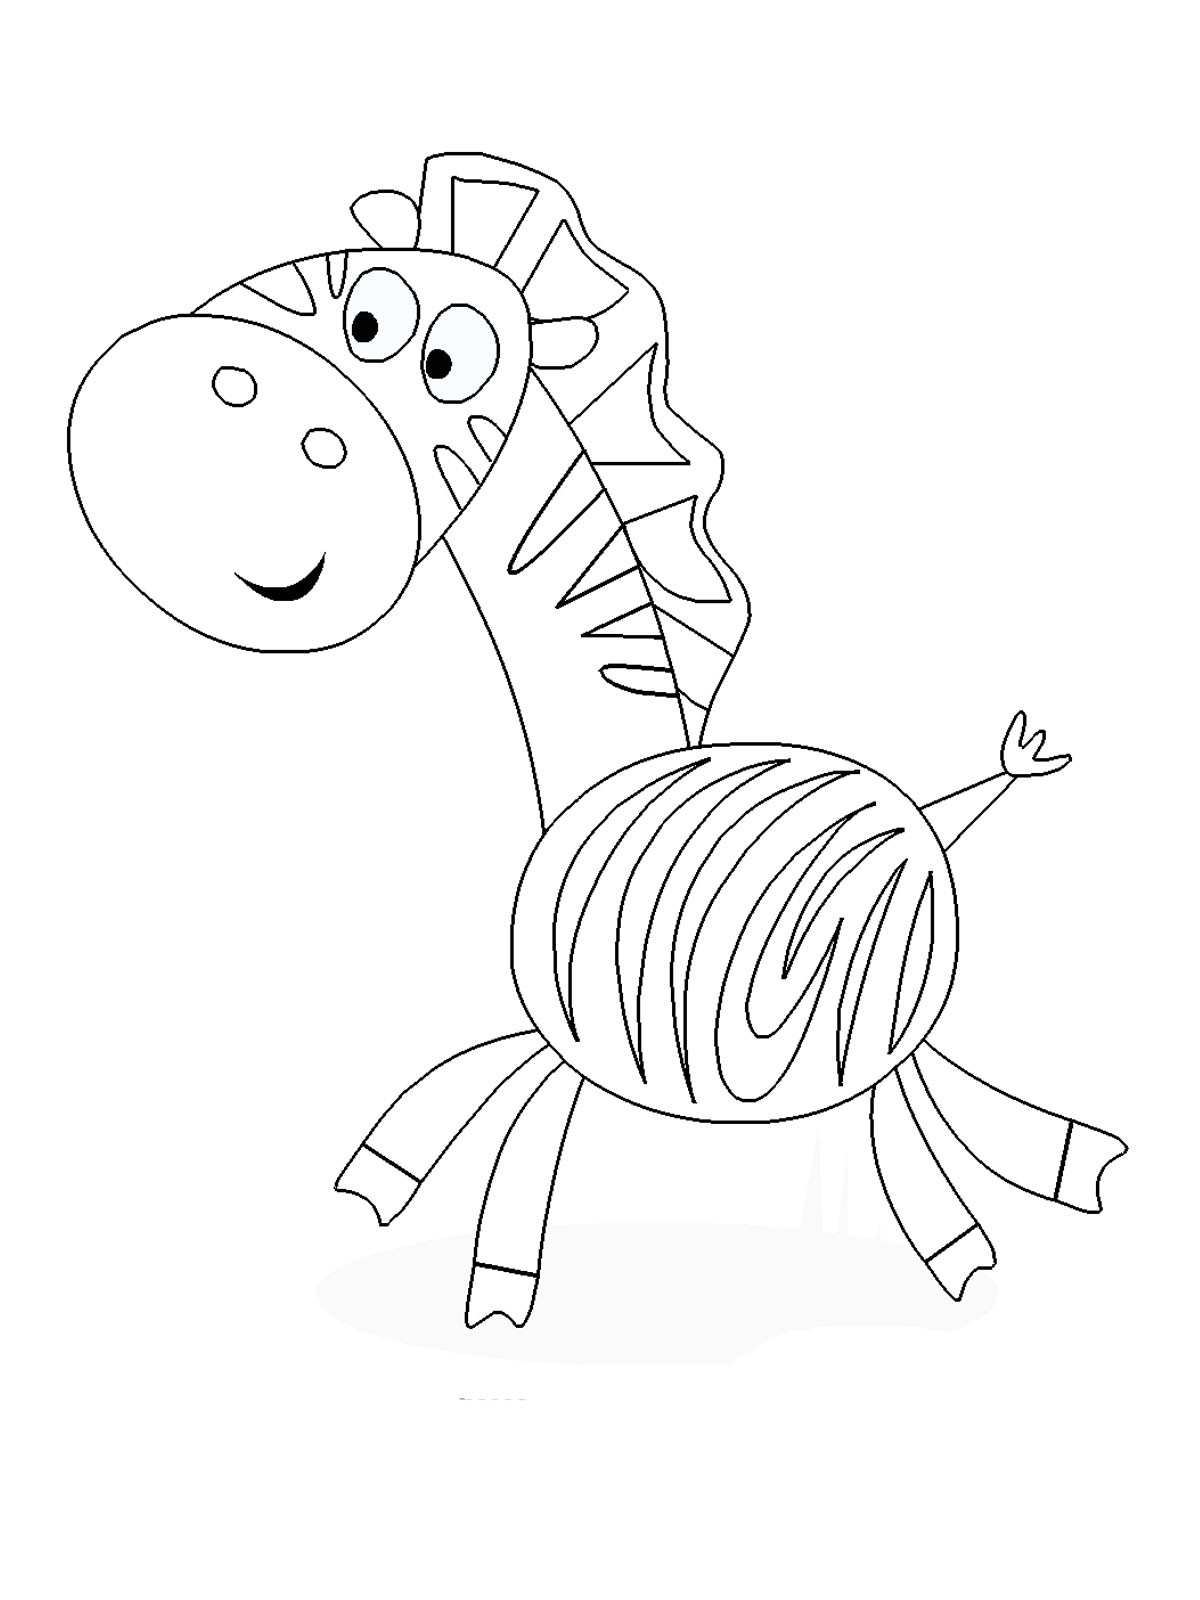 Kids Coloring Pages Free
 Printable coloring pages for kids